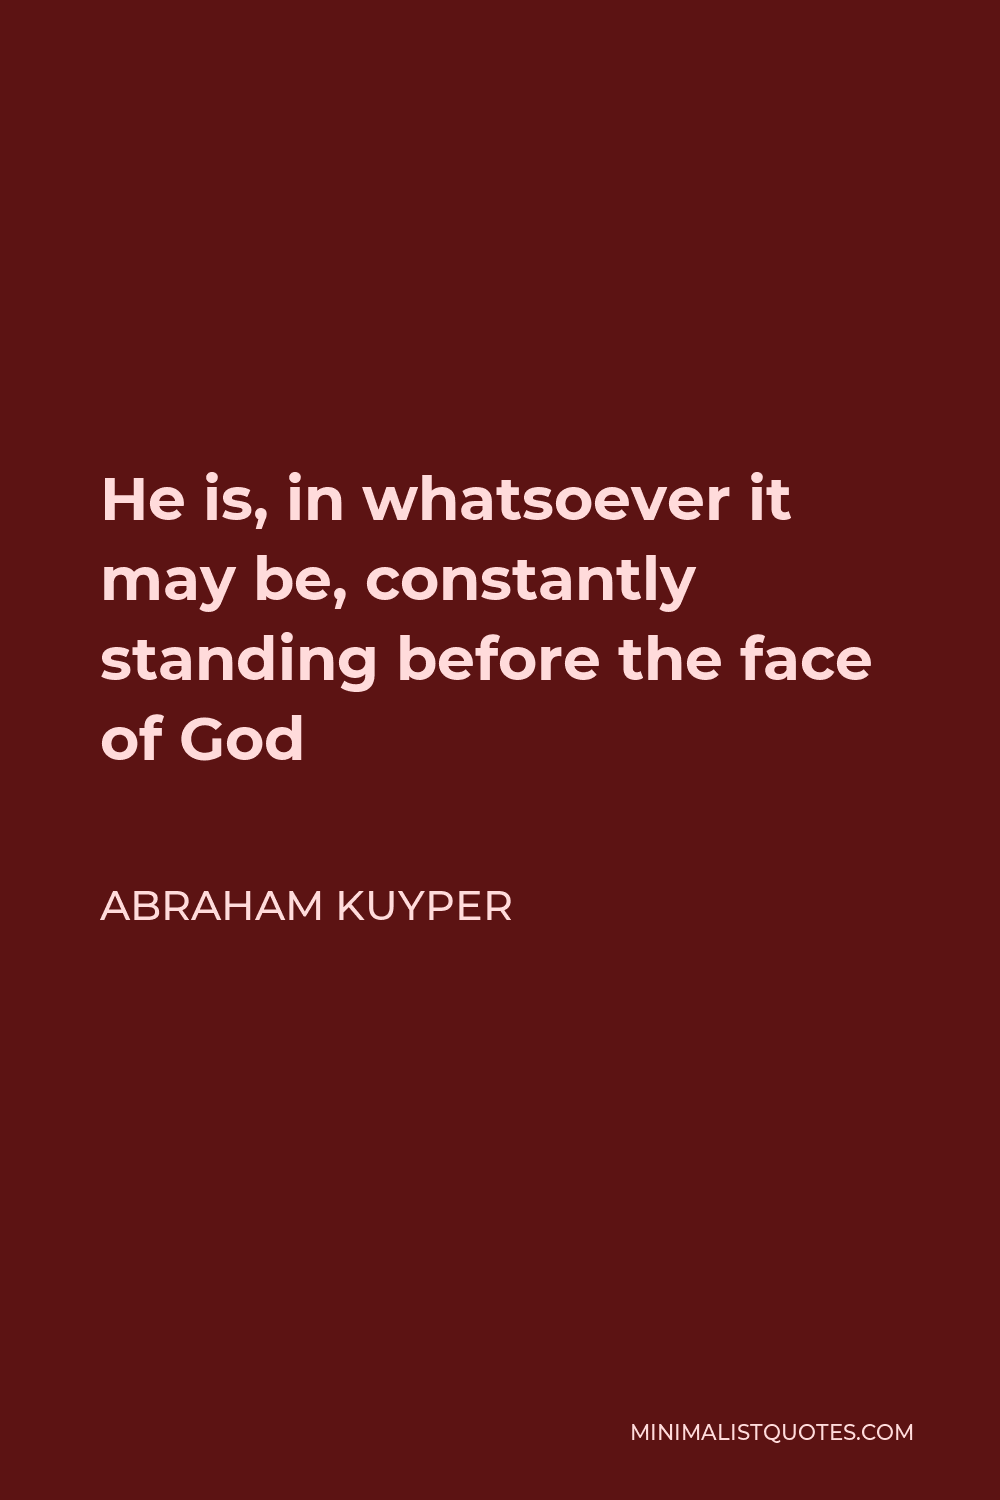 Abraham Kuyper Quote - He is, in whatsoever it may be, constantly standing before the face of God